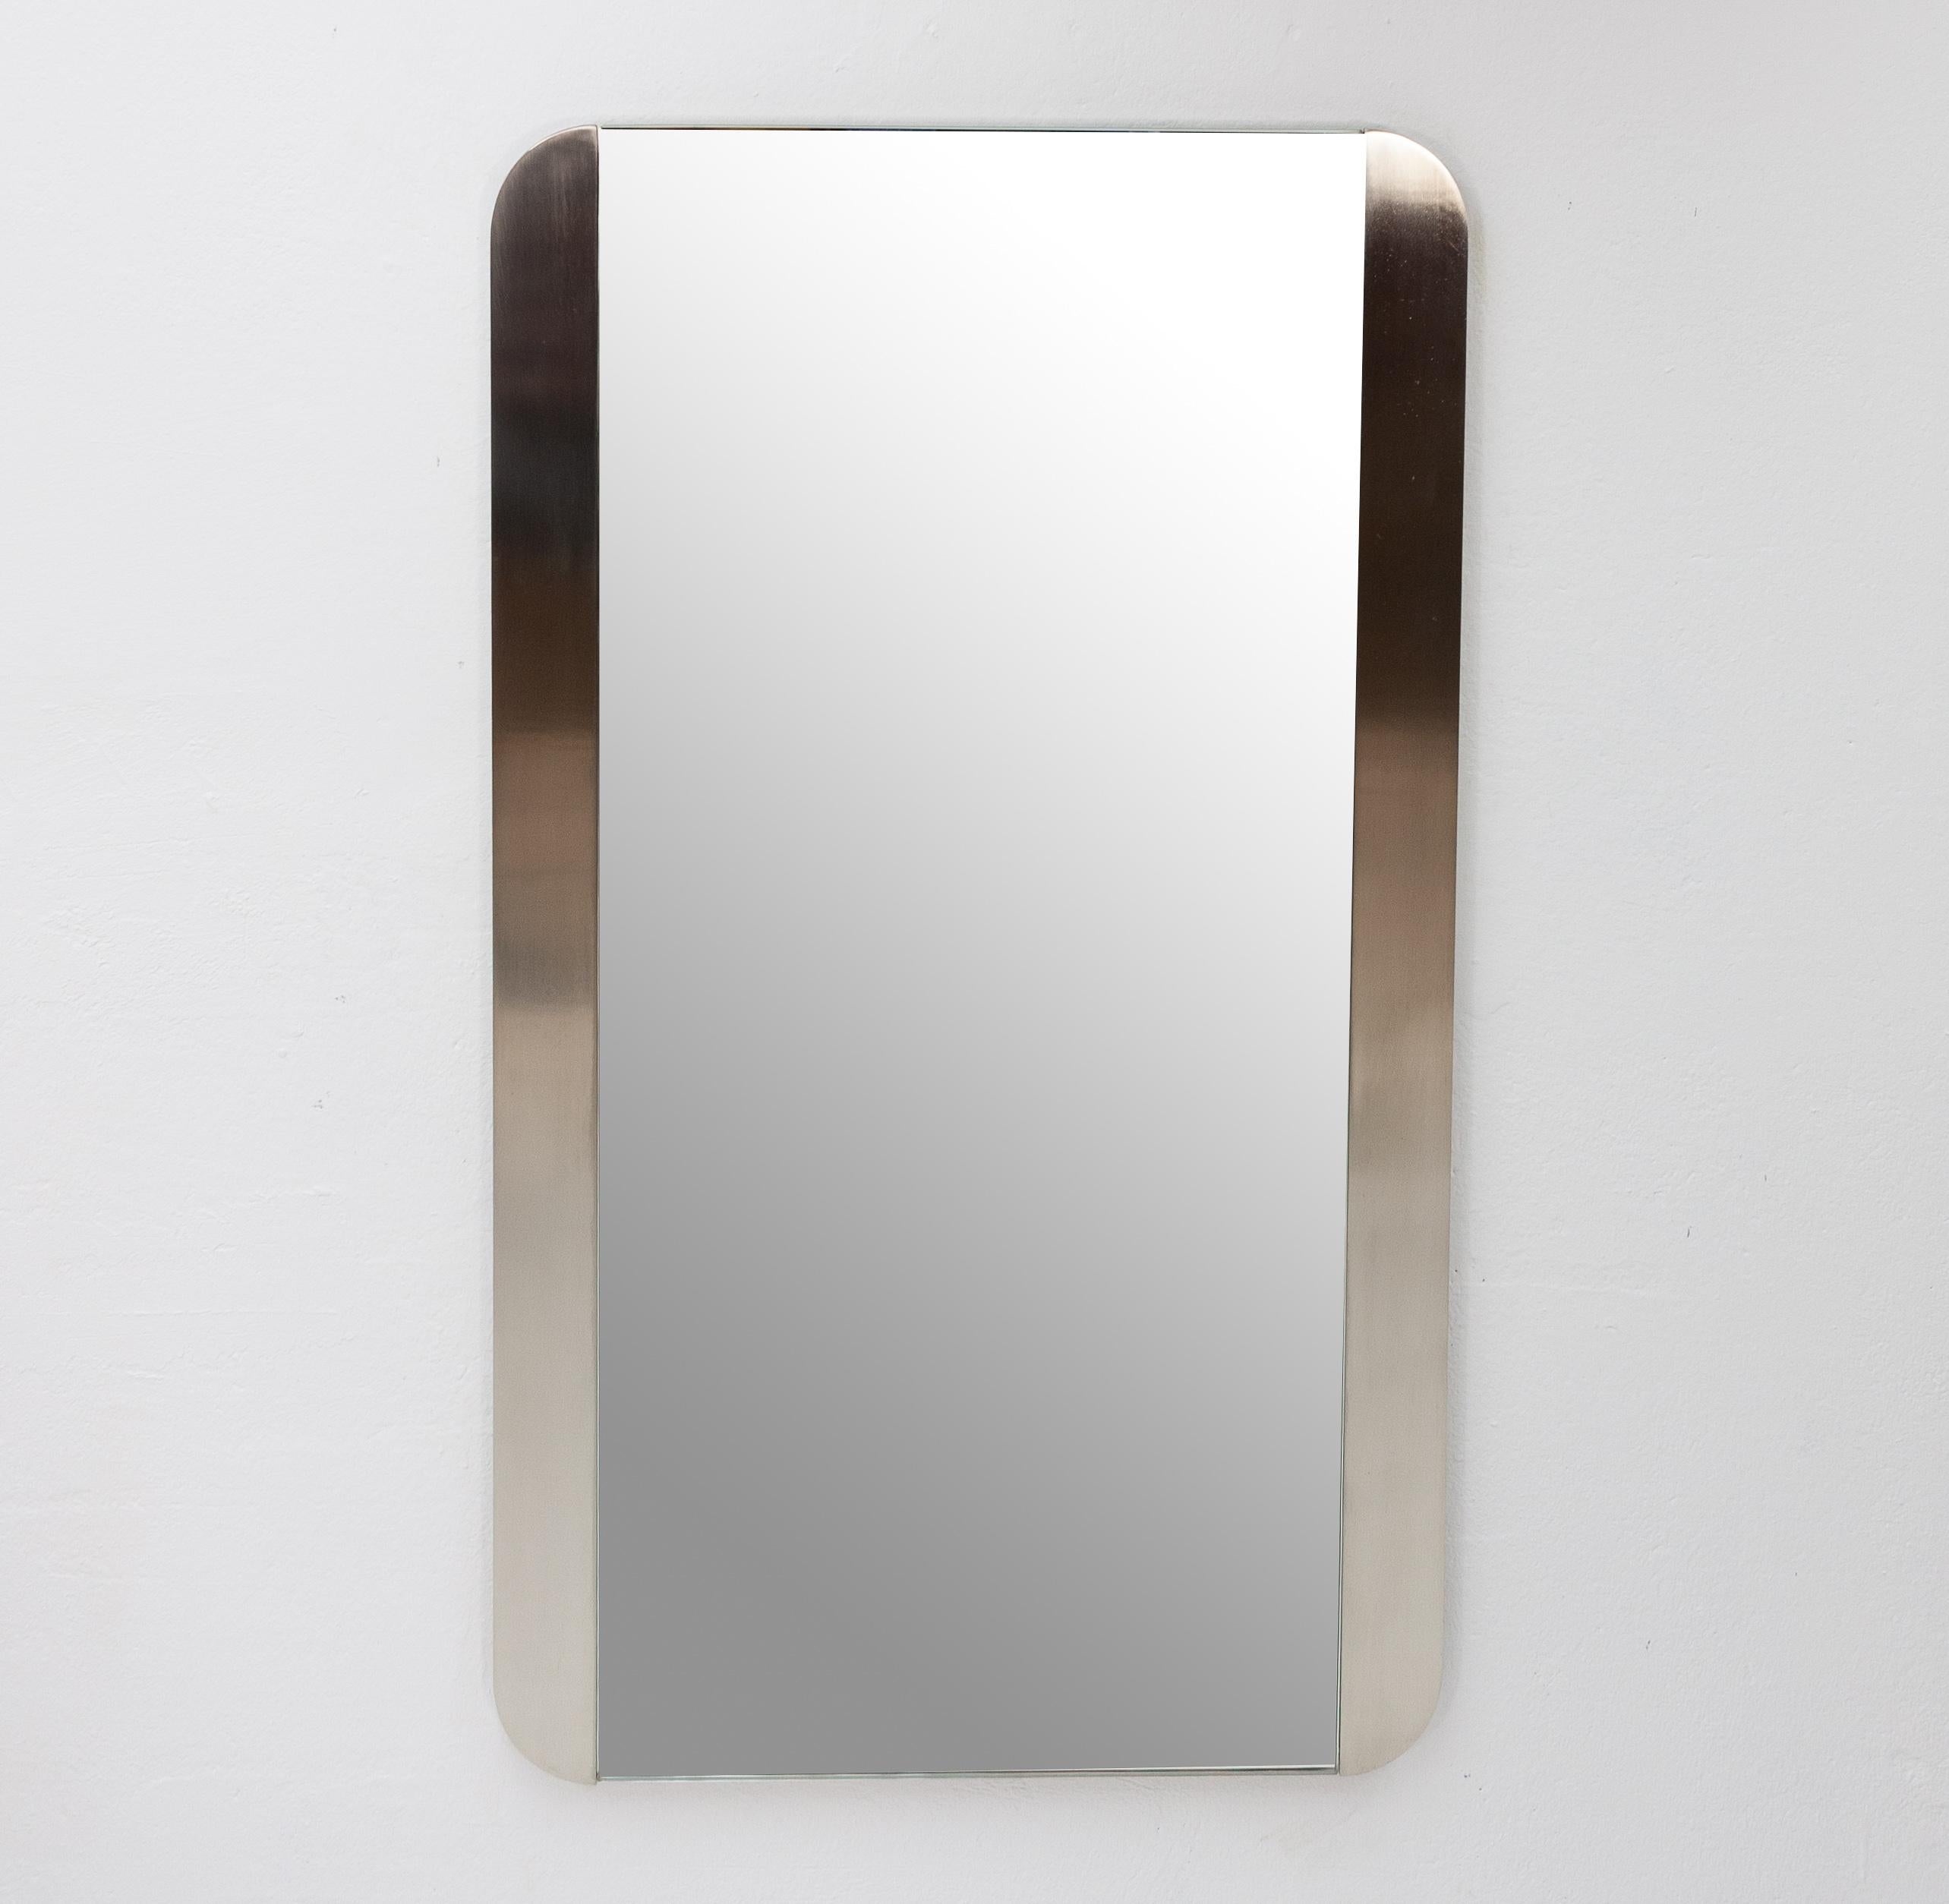 Italian Mirror with Brushed Aluminum Frame, 1970s